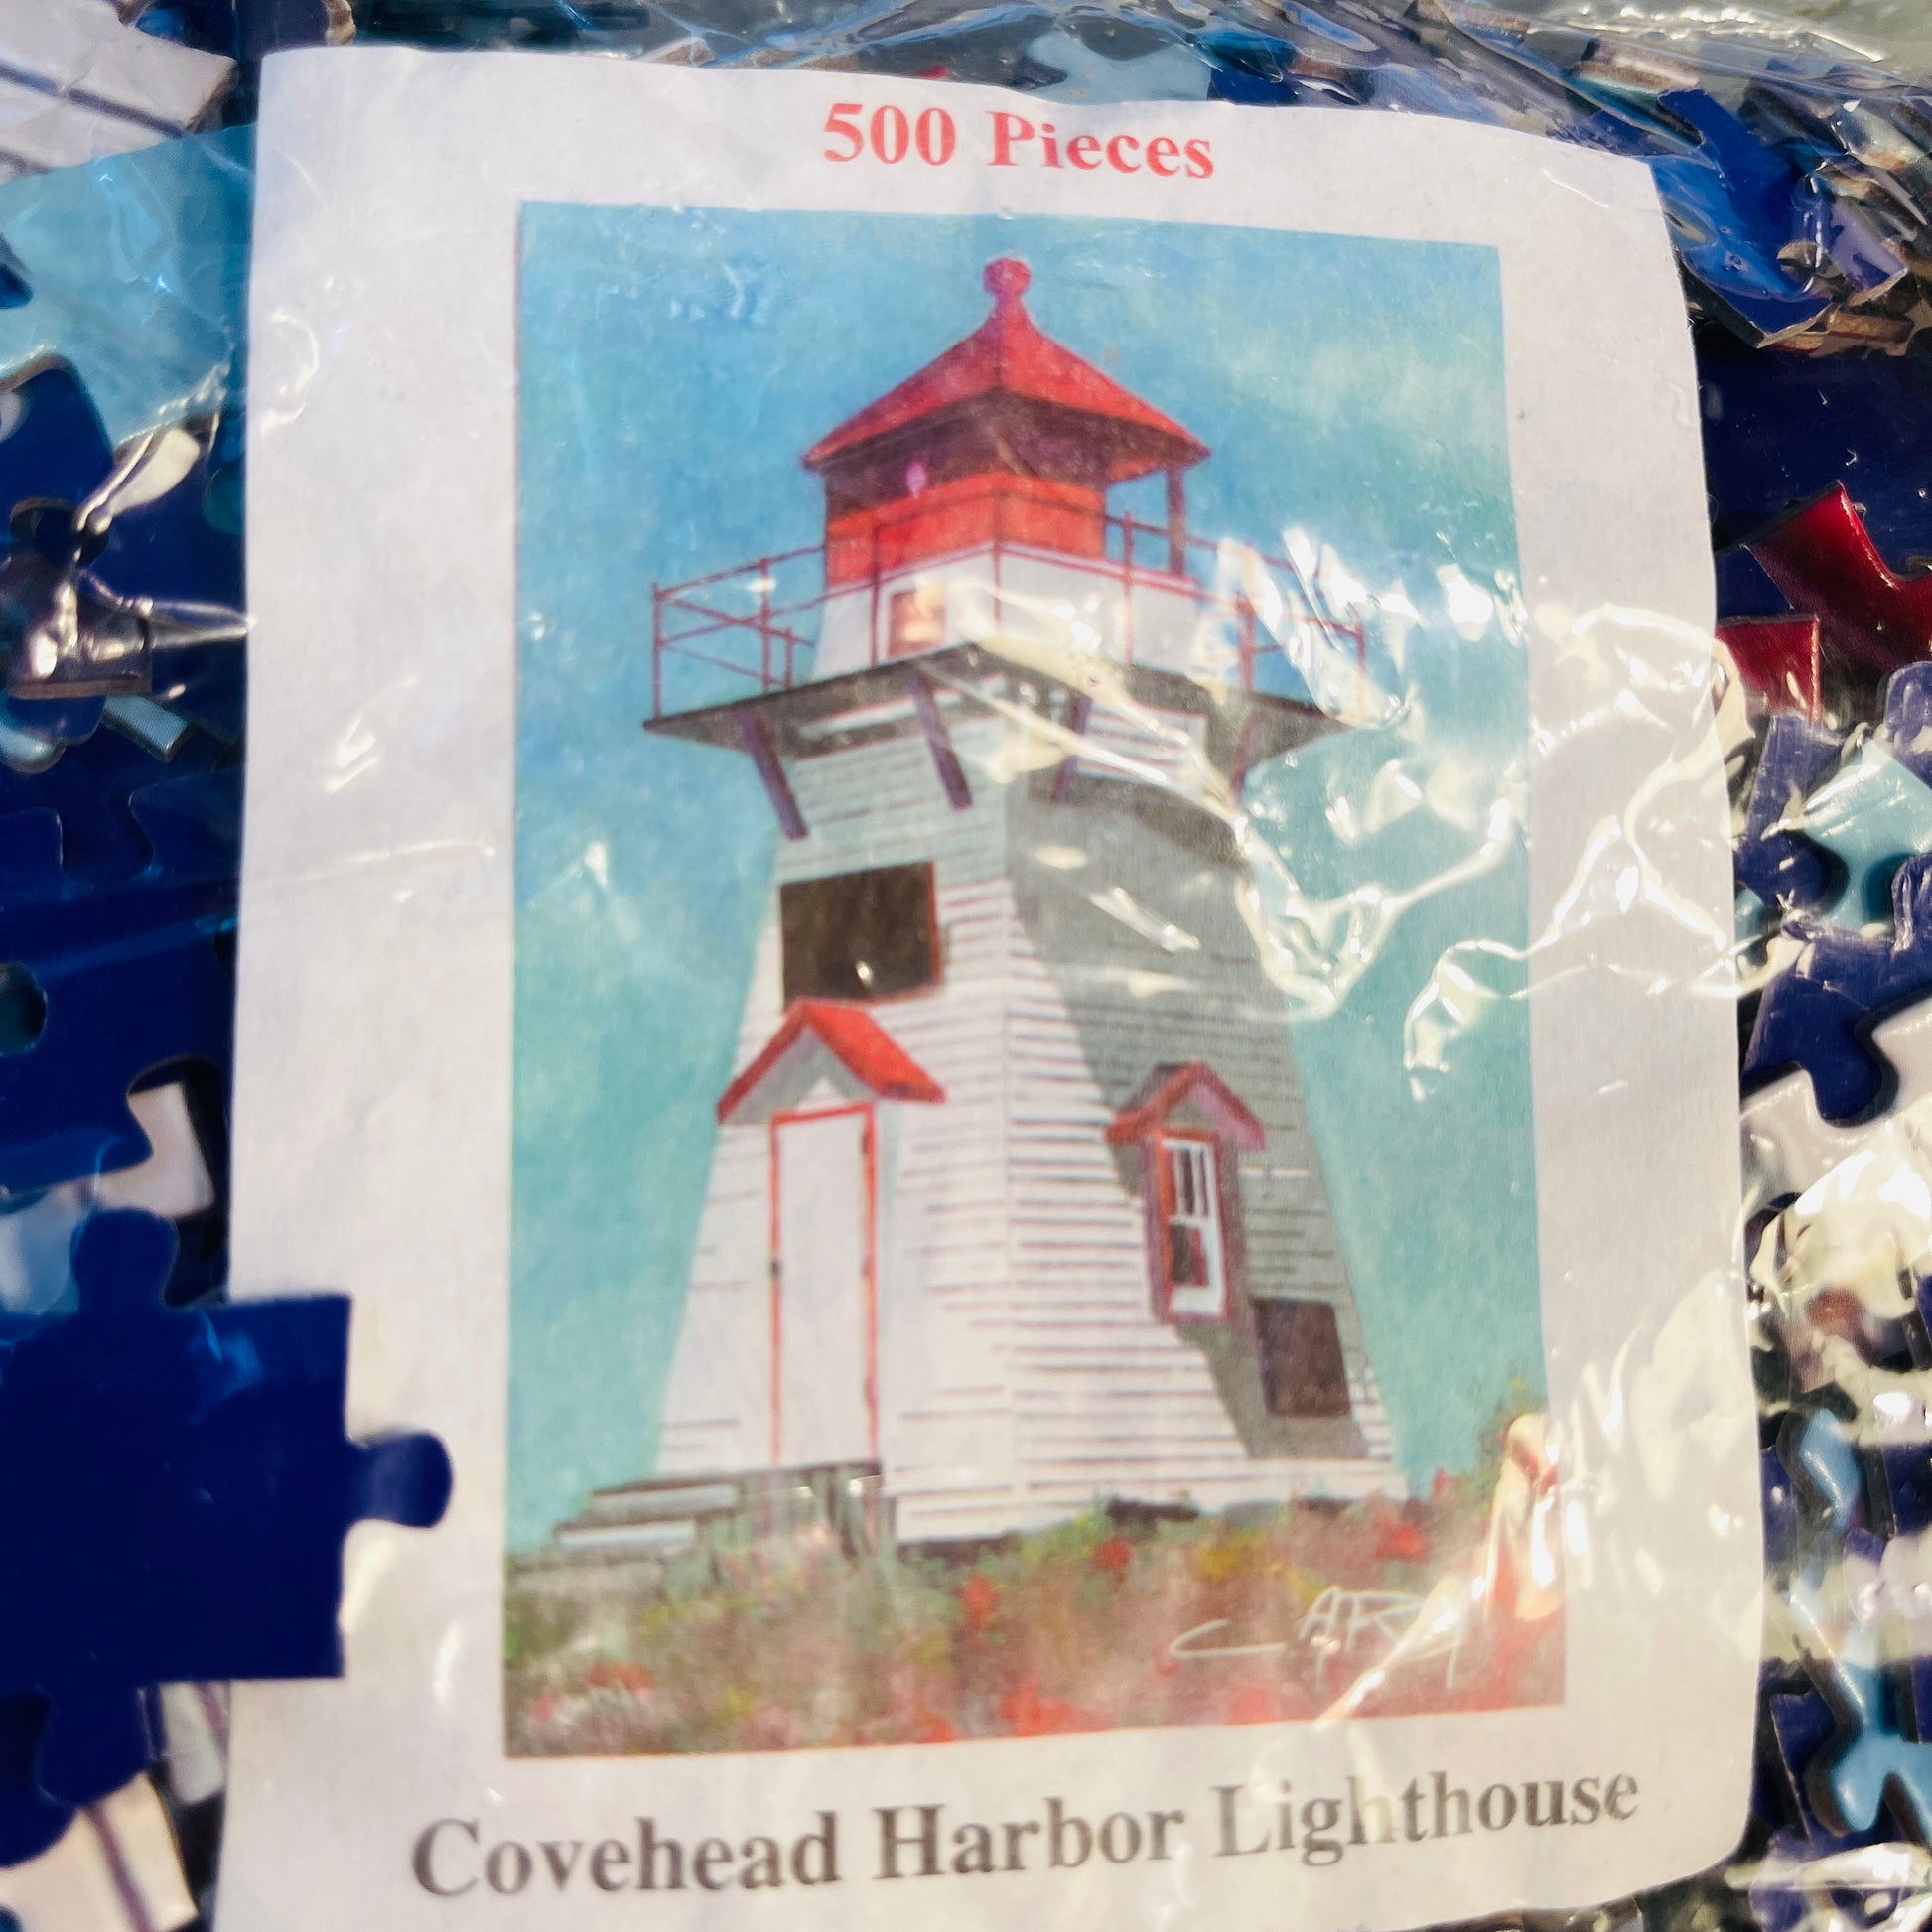 Lighthouse puzzles, choice of 4, 500 piece, nautical theme puzzles depicting lighthouses, see variations*